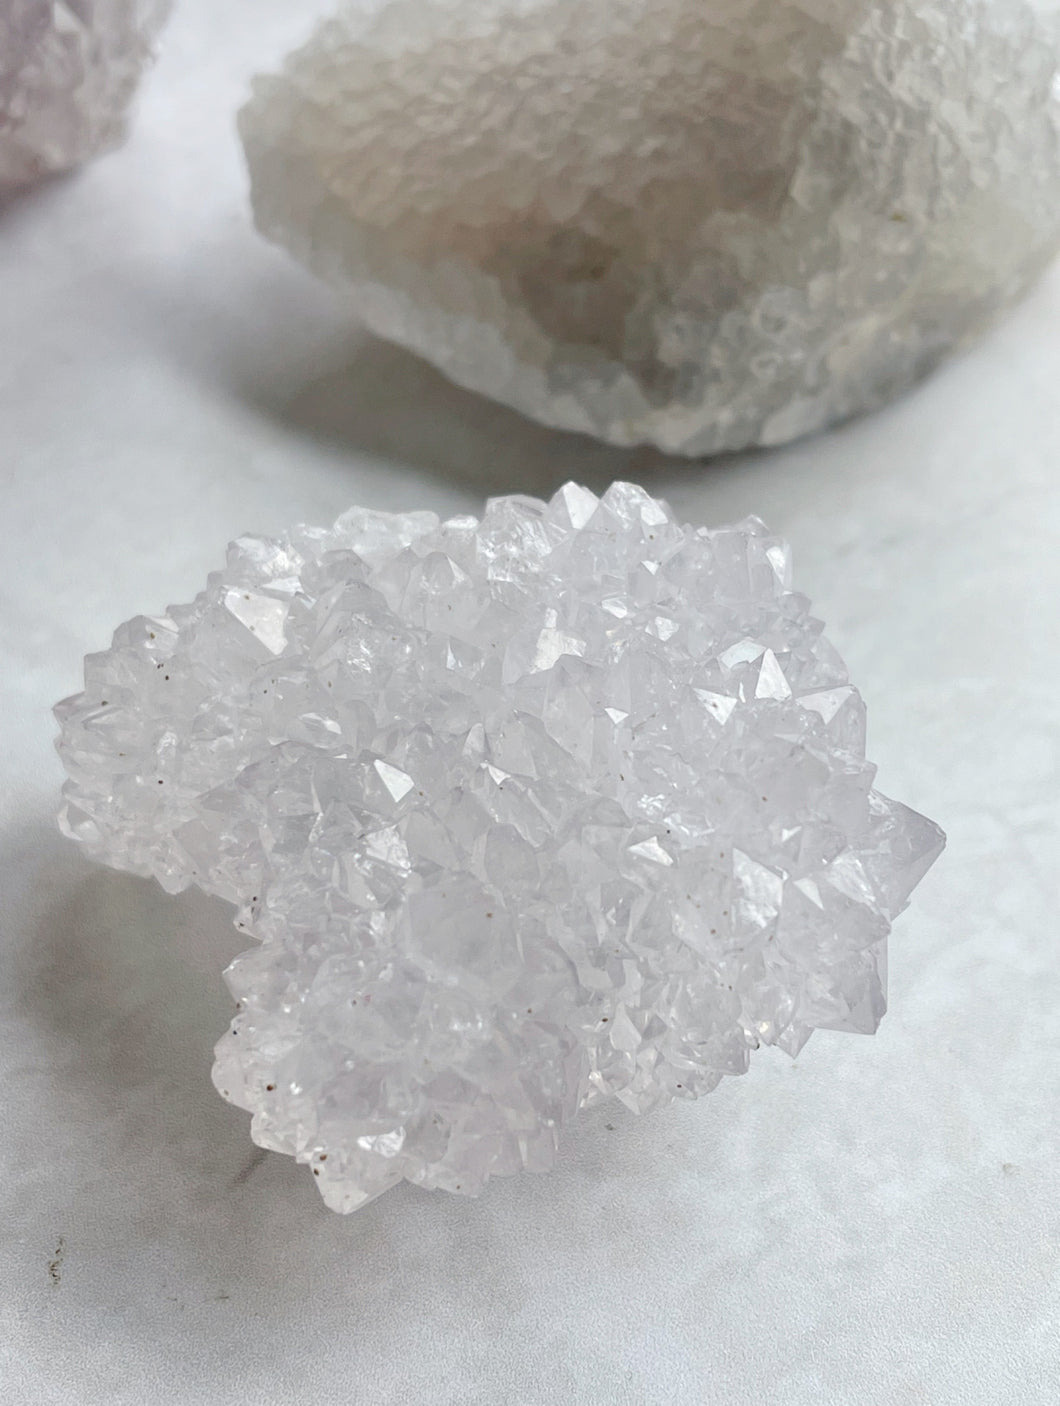 Anandalite Cluster